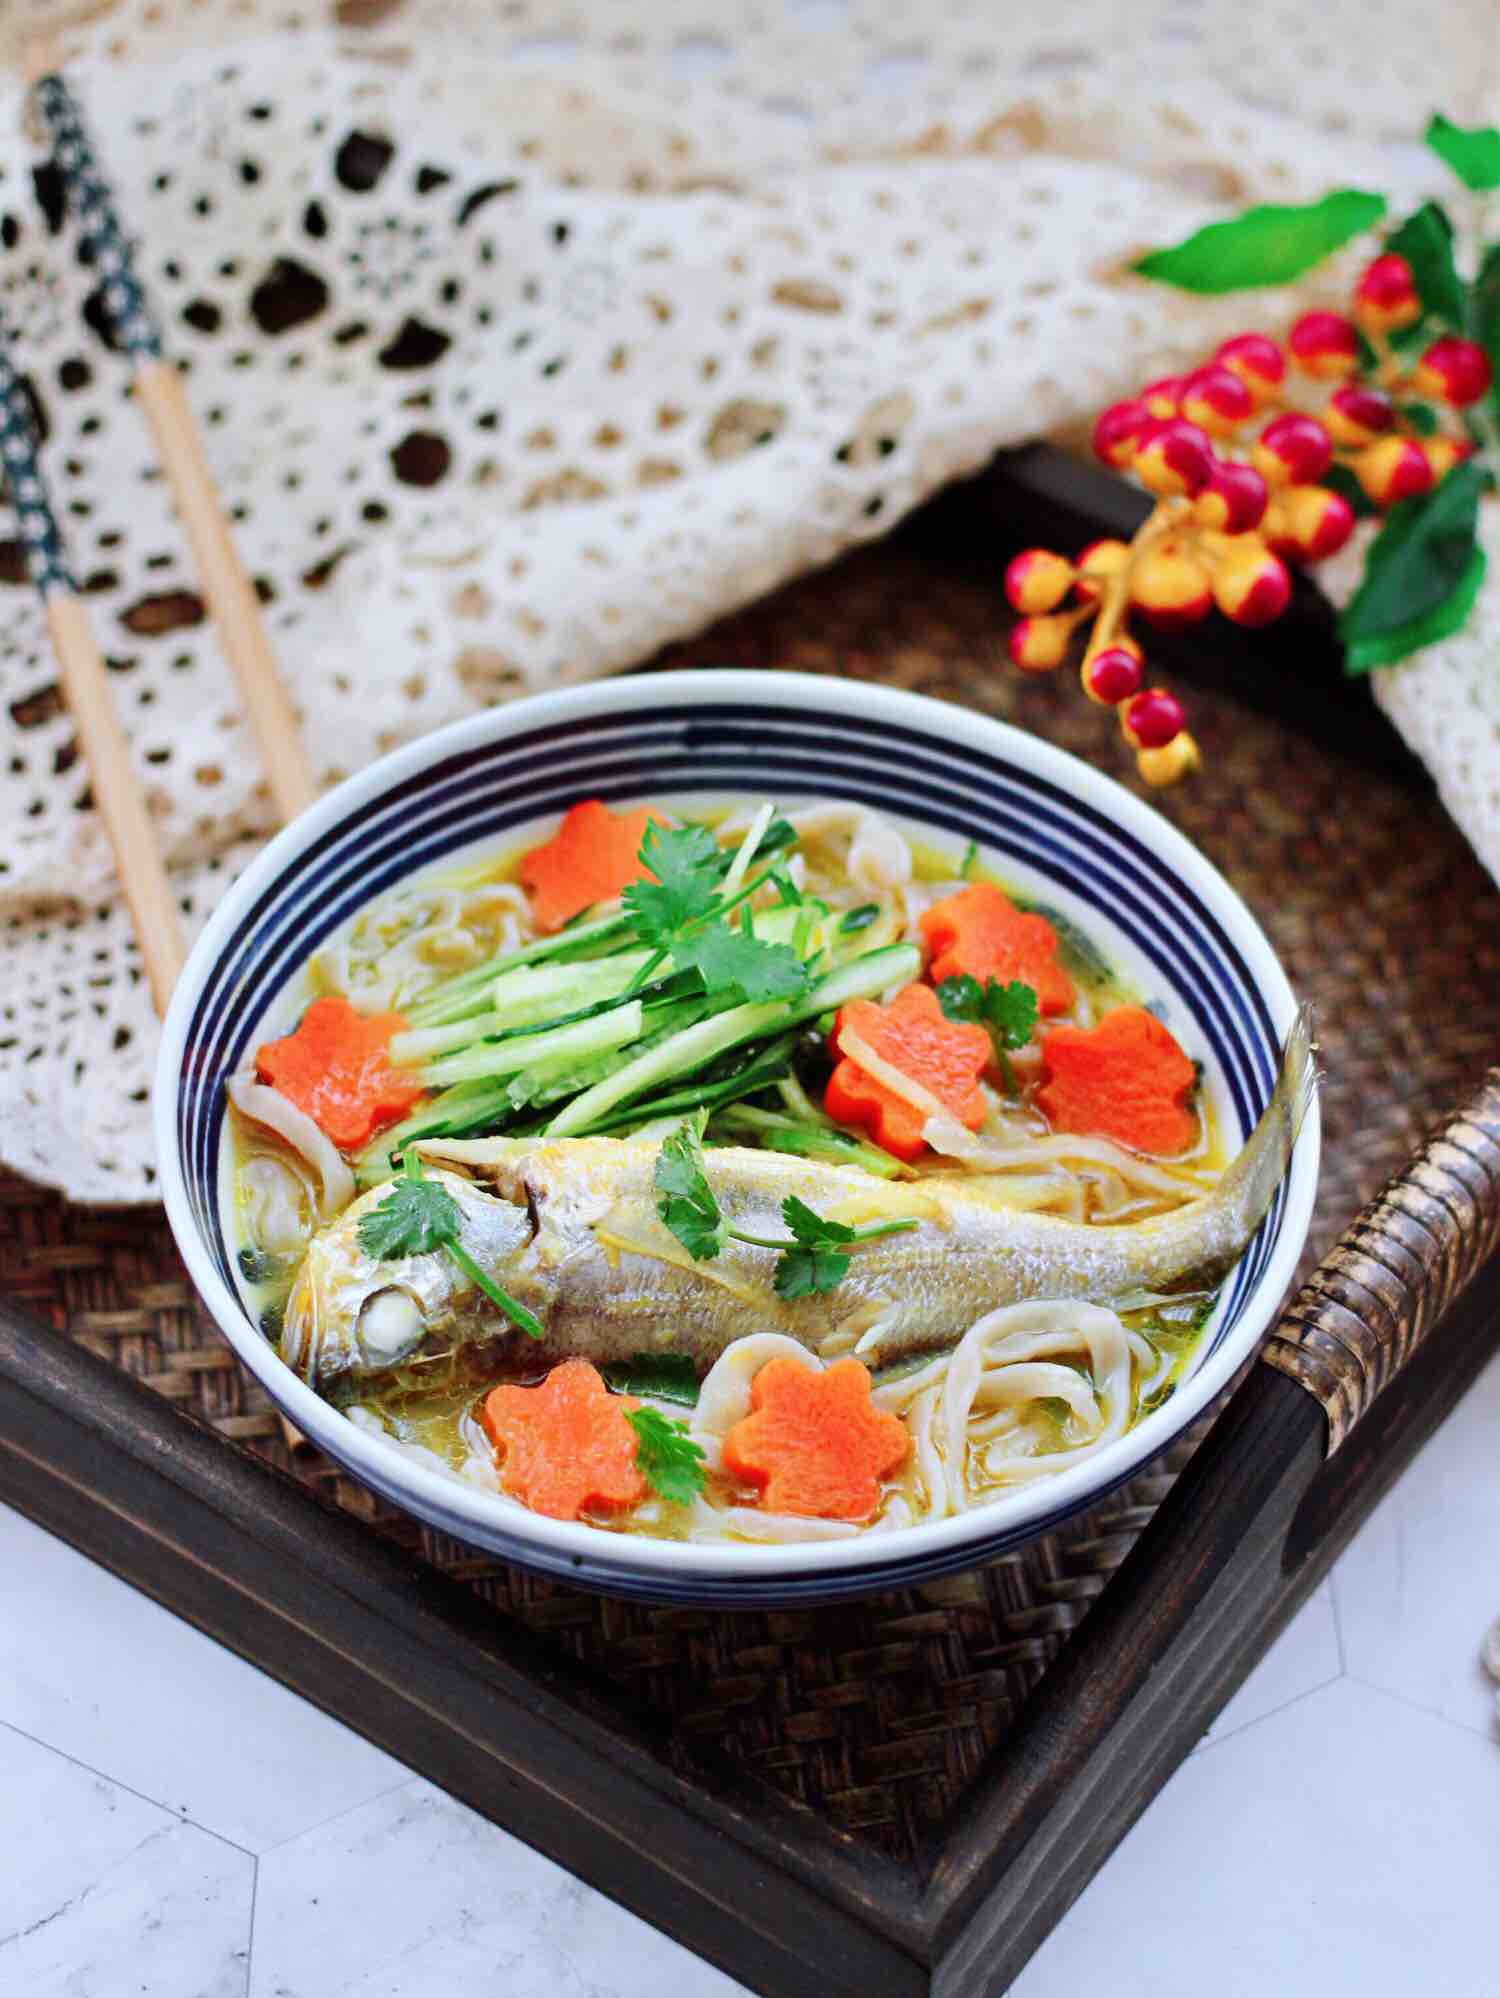 Yellow Croaker and Sweet Potato Noodles in Sour Soup